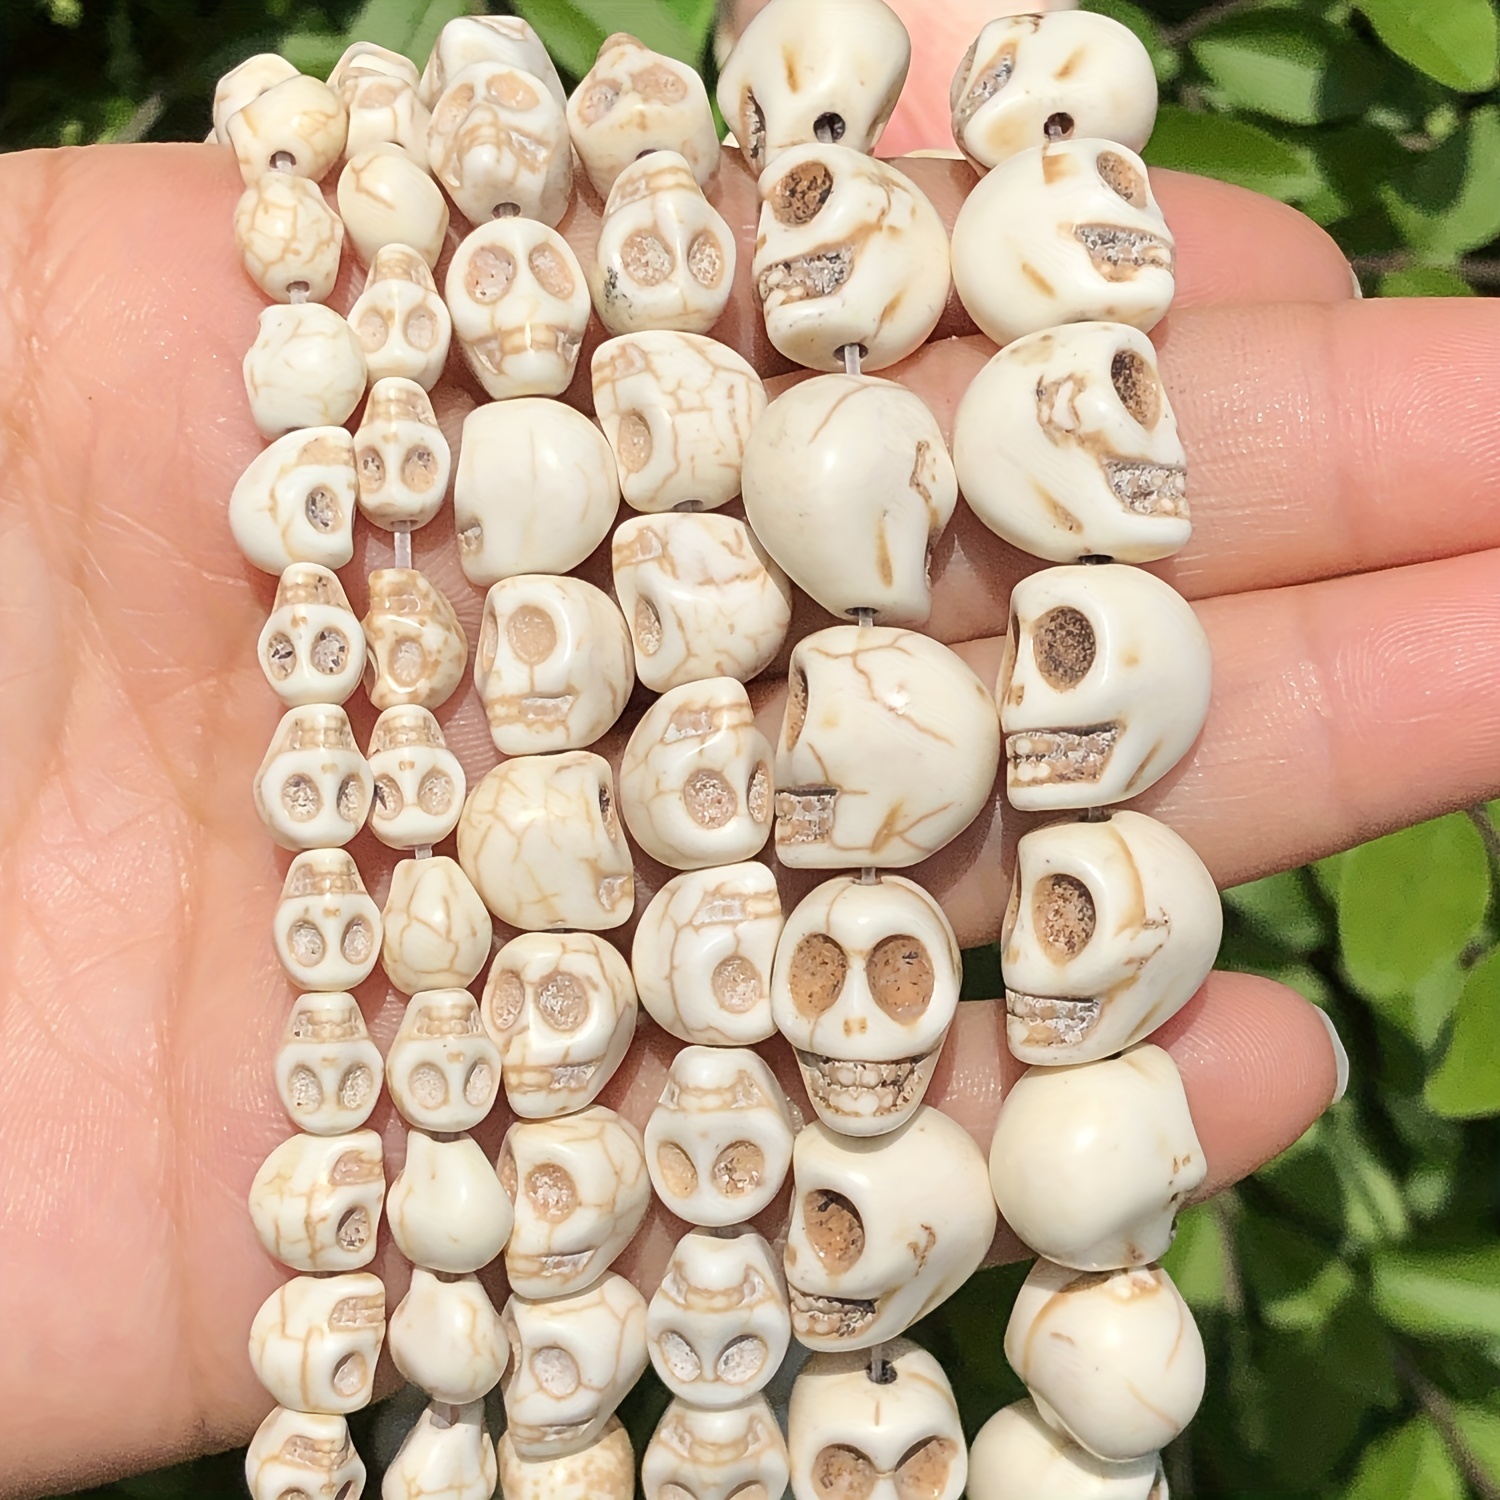 50pc/lot 13mm Cute Resin Small Polymer Clay Rose Flowers Beads Diy  Bracelets Necklace Earrings Jewlery